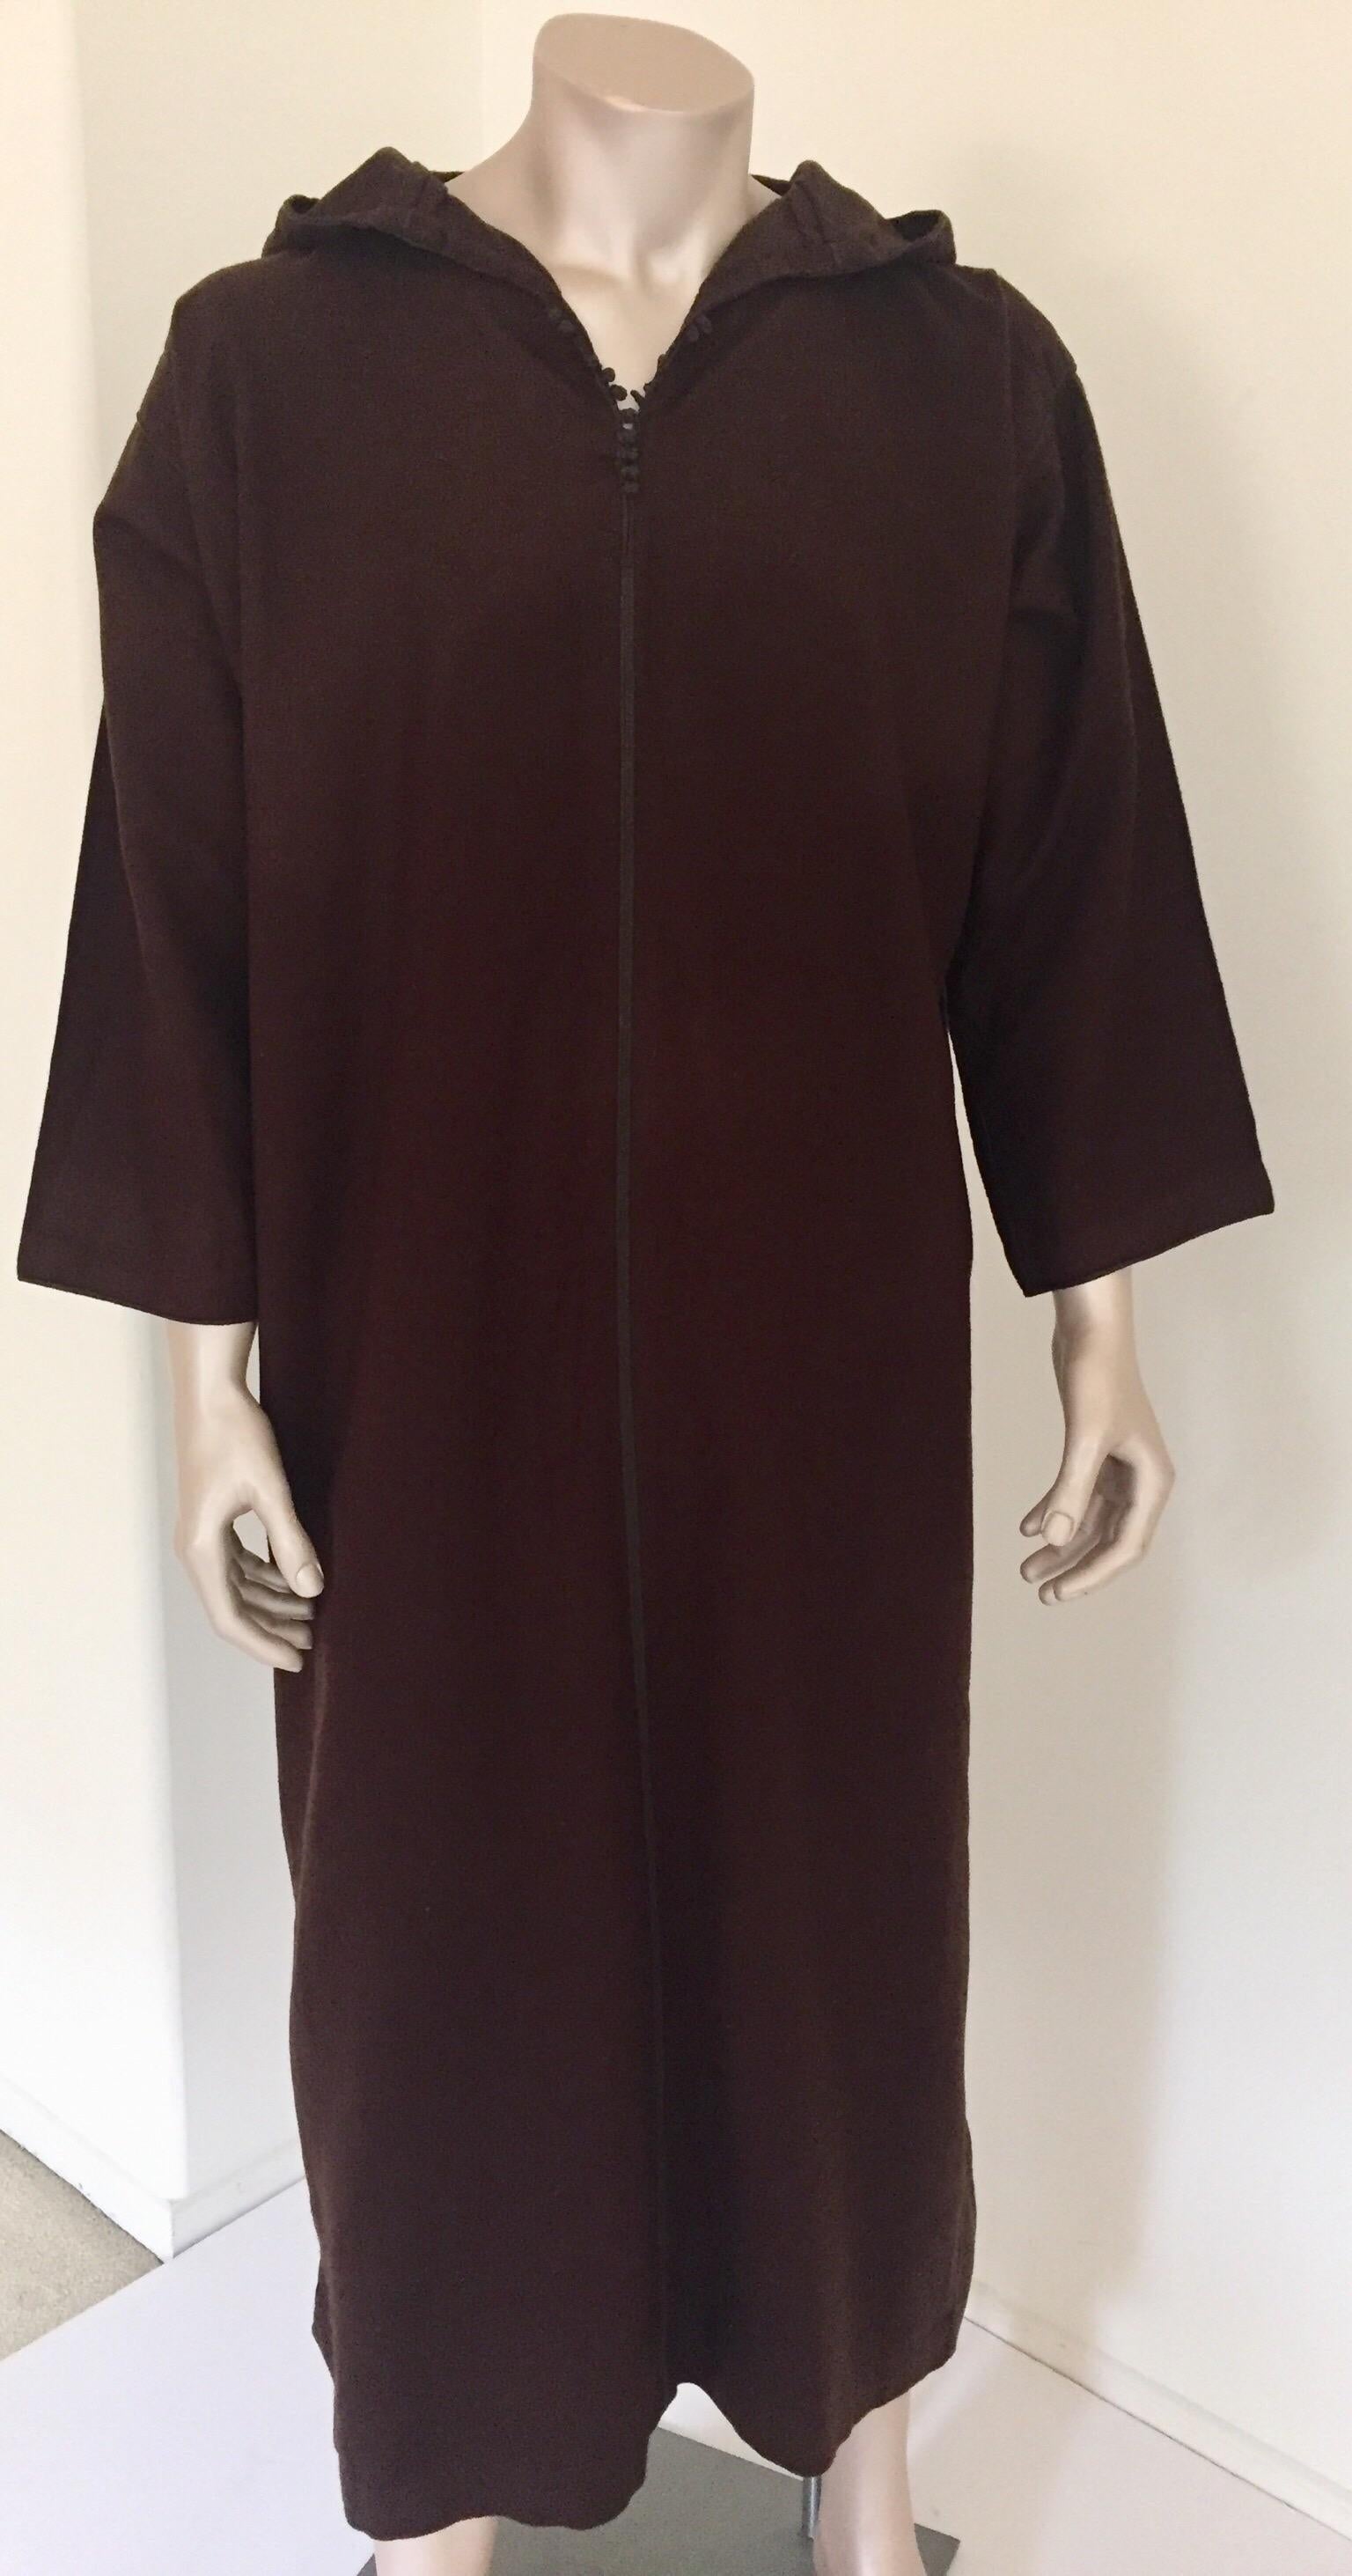 Moroccan traditional gentleman handcrafted hooded wool cashmere djellaba.
Moroccan traditional ethnic gentleman kaftan coat in dark chocolate brown wool.
This North African long hooded kaftan coat features a traditional form with side slits and long